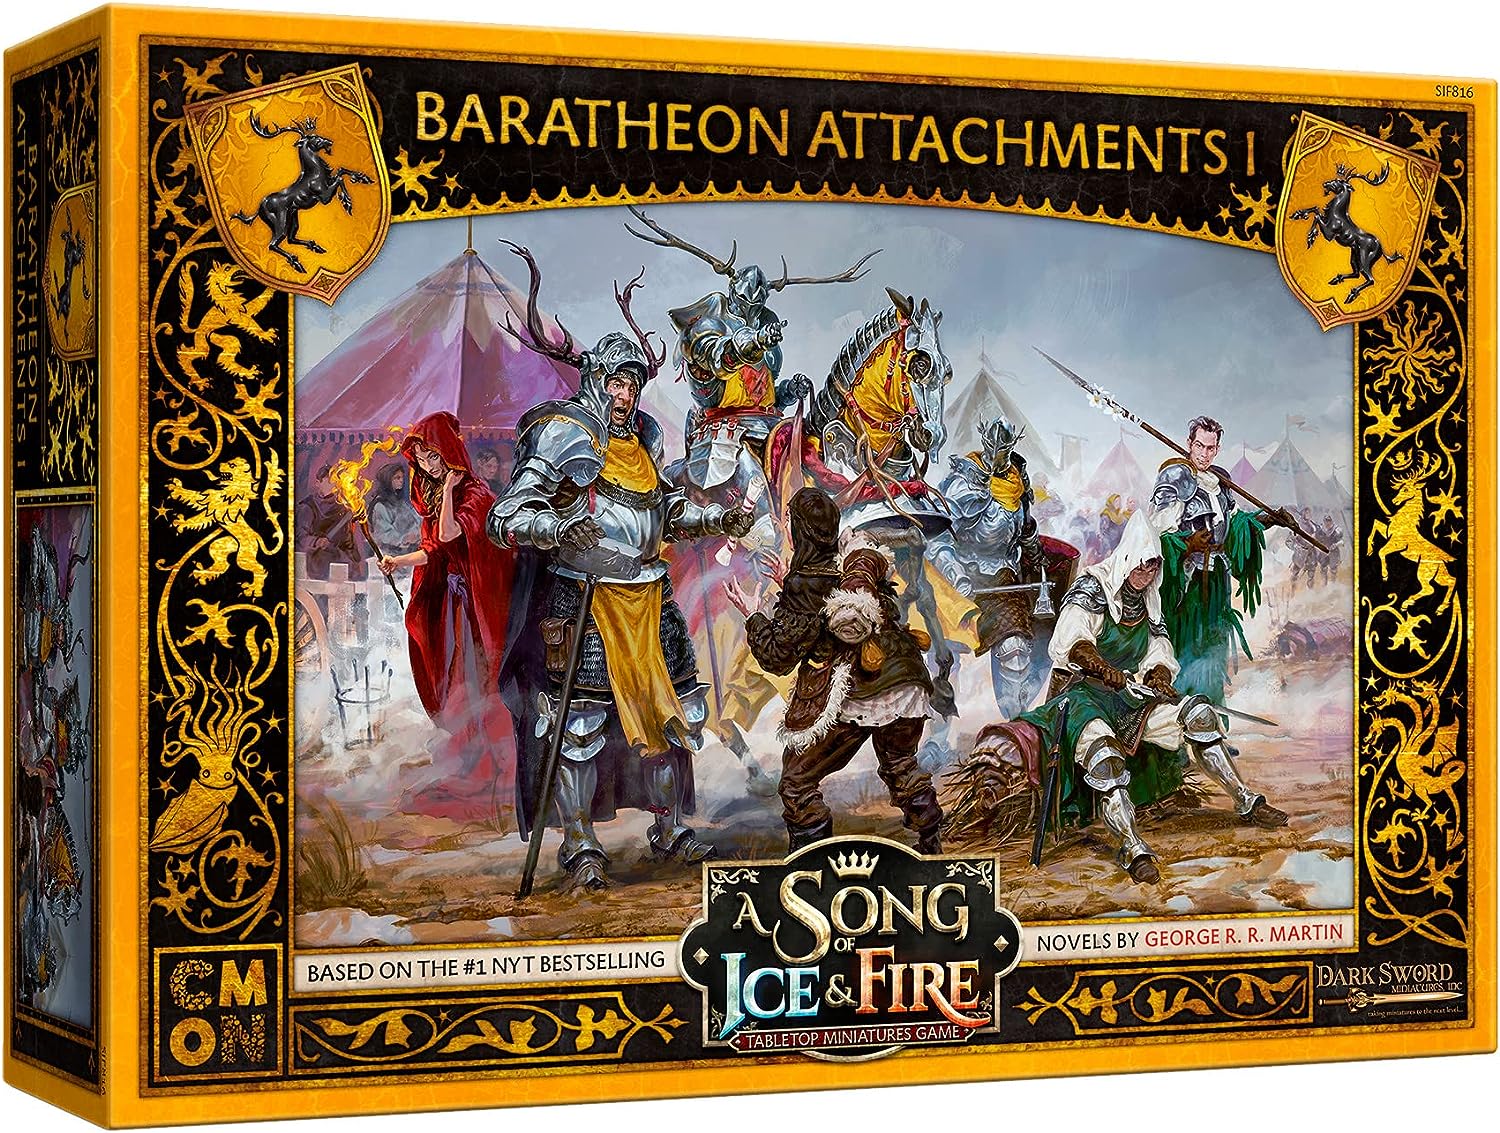 CMON A Song of Ice and Fire Tabletop Miniatures Game Baratheon Attachments I Box Set - Enhance Your Army, Strategy Game for Adults, Ages 14+, 2+ Players, 45-60 Minute Playtime, Made - image 1 of 4